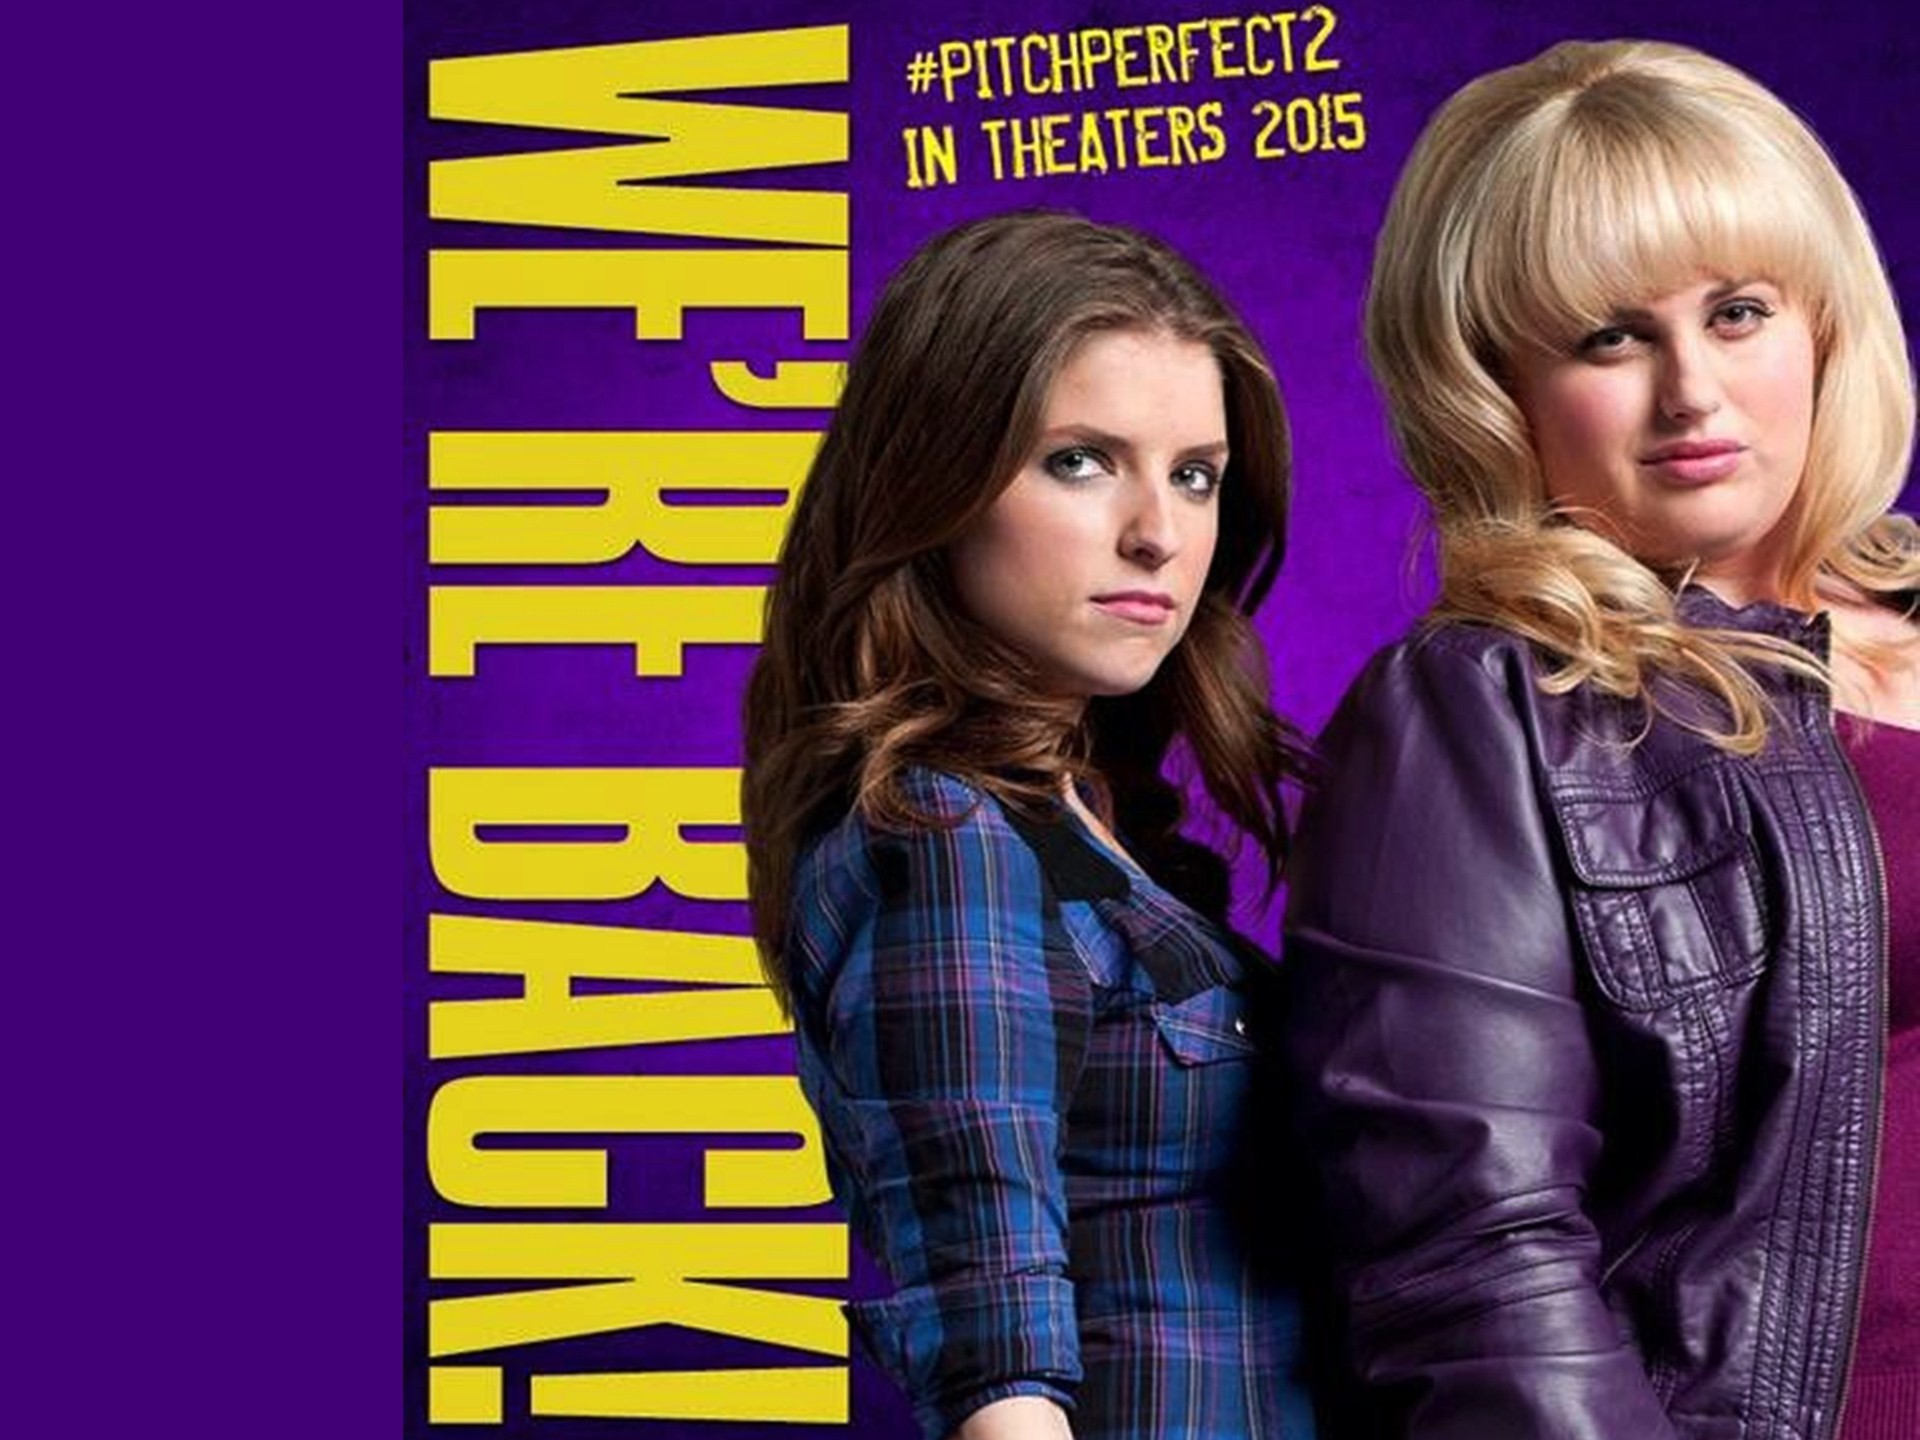 1920x1440 Pitch Perfect 2 Movie Poster HD Wallpaper